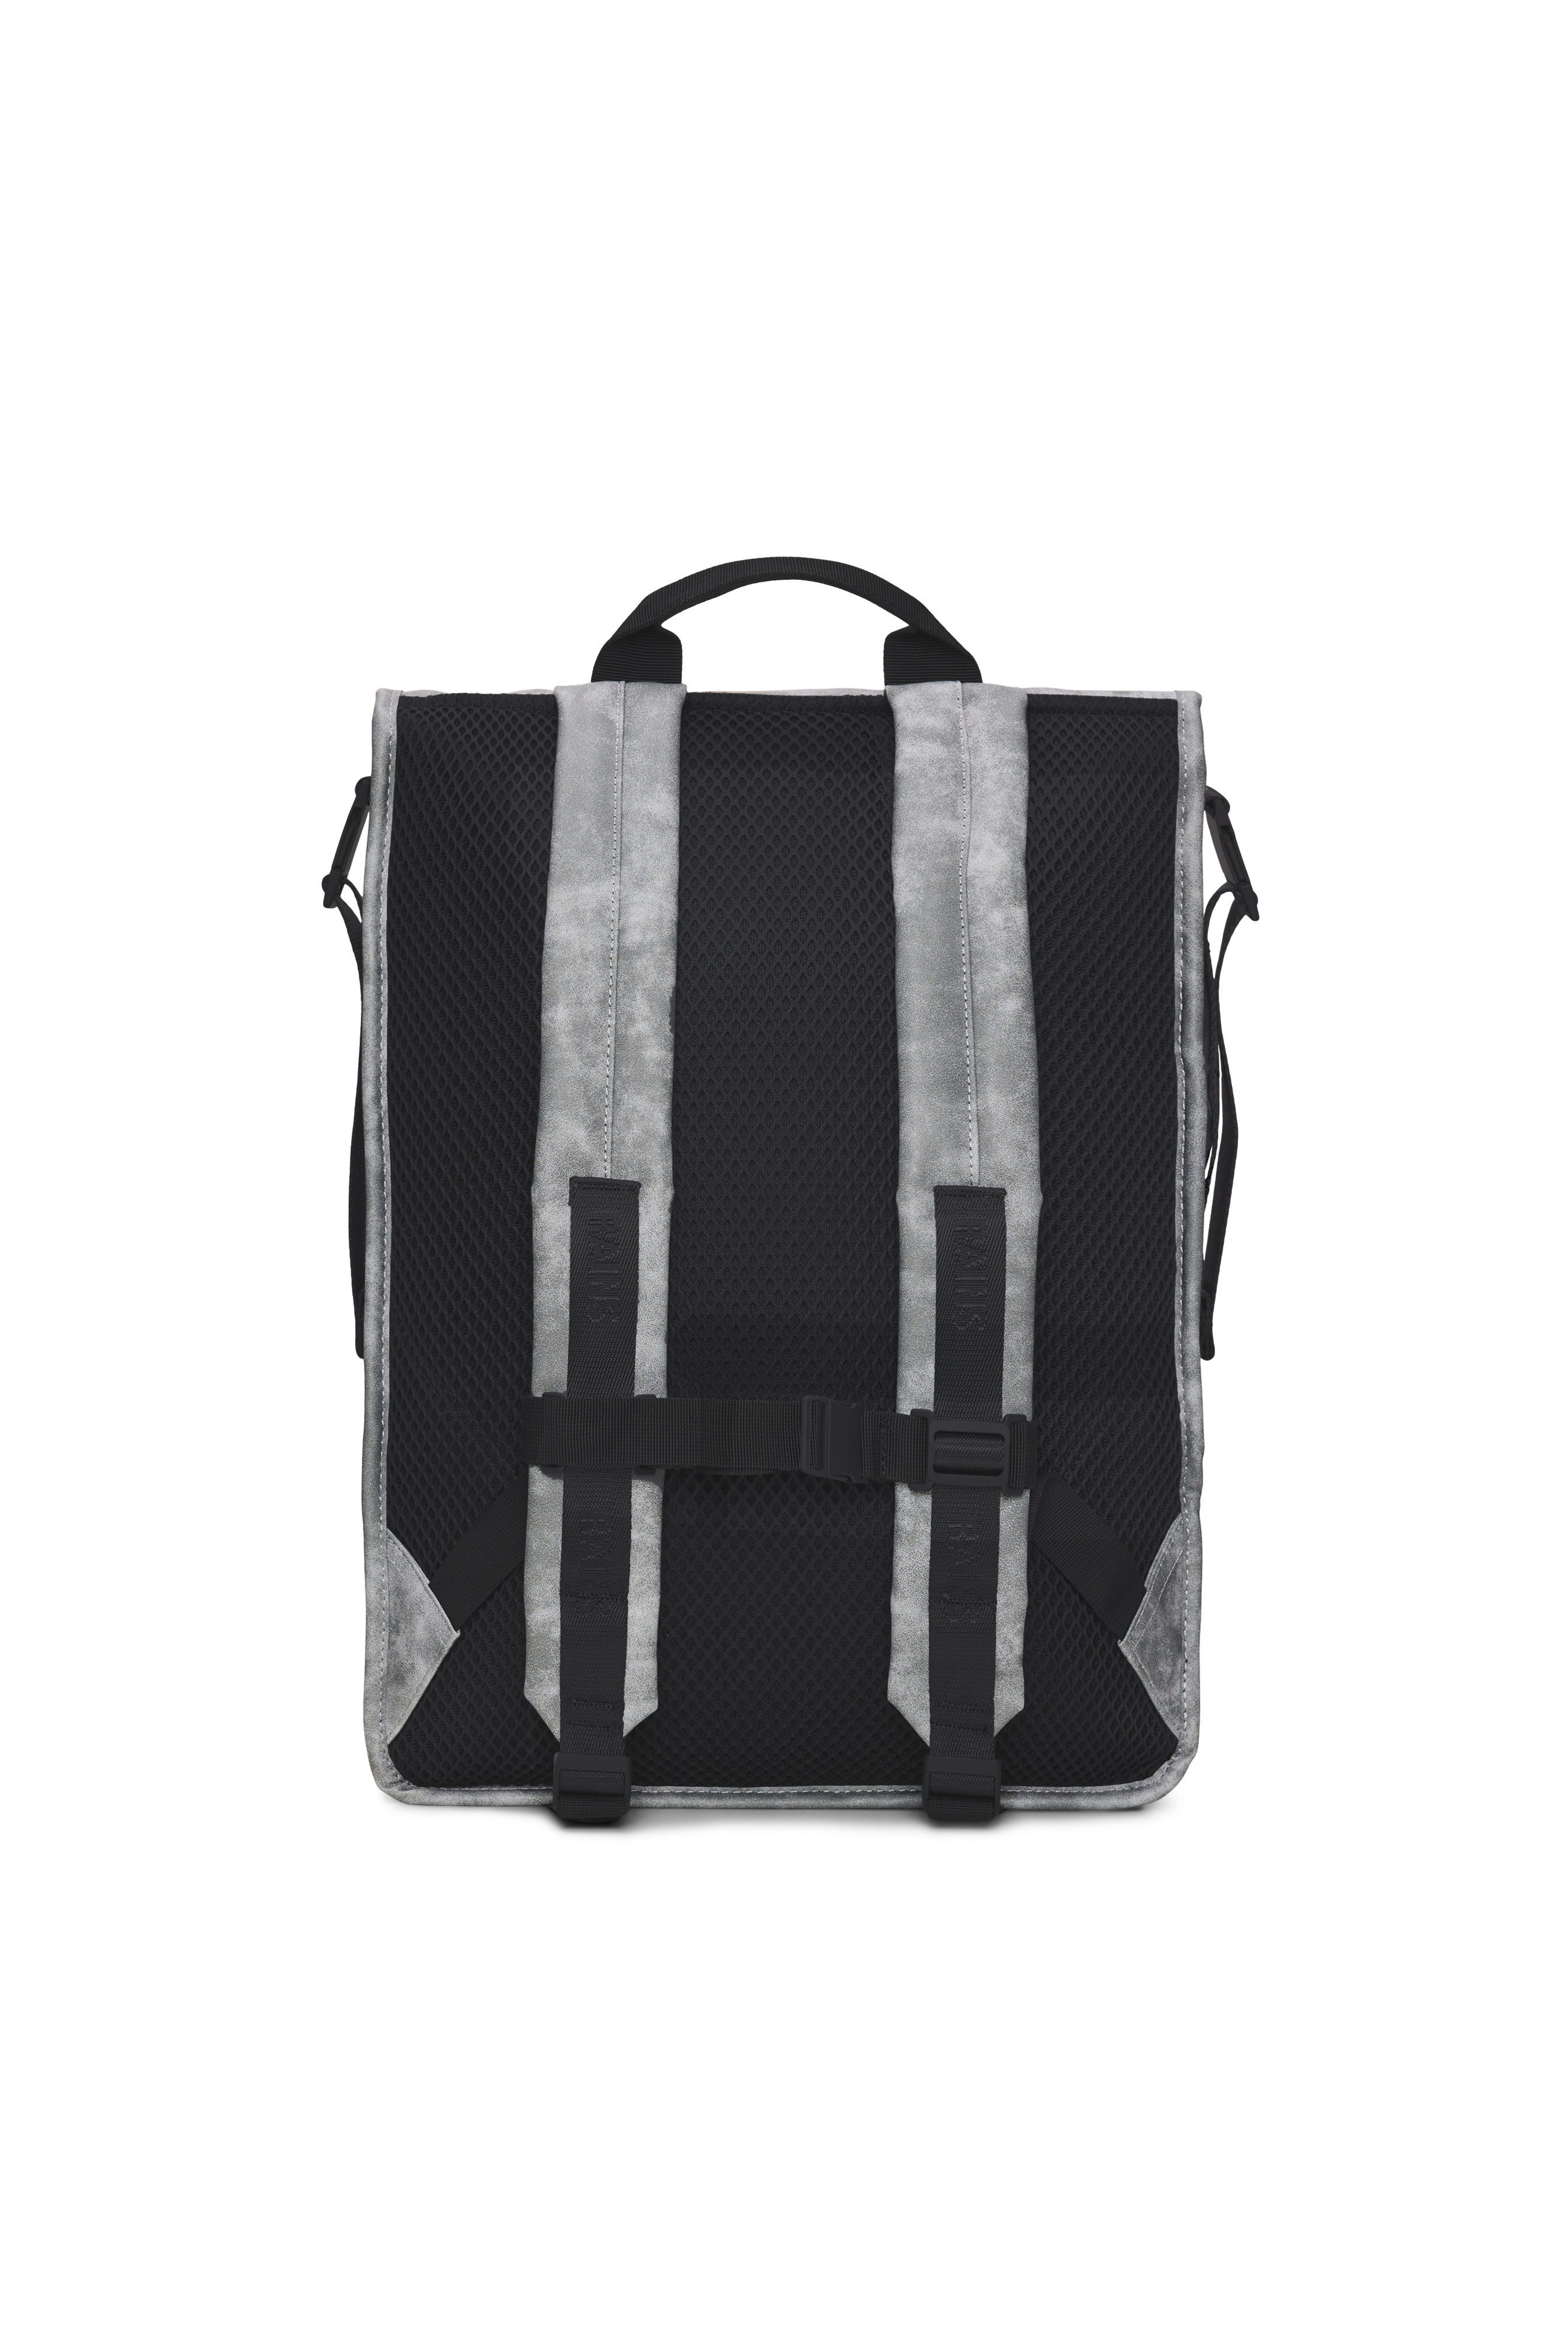 Trail Rolltop Backpack W3 - Distressed Grey